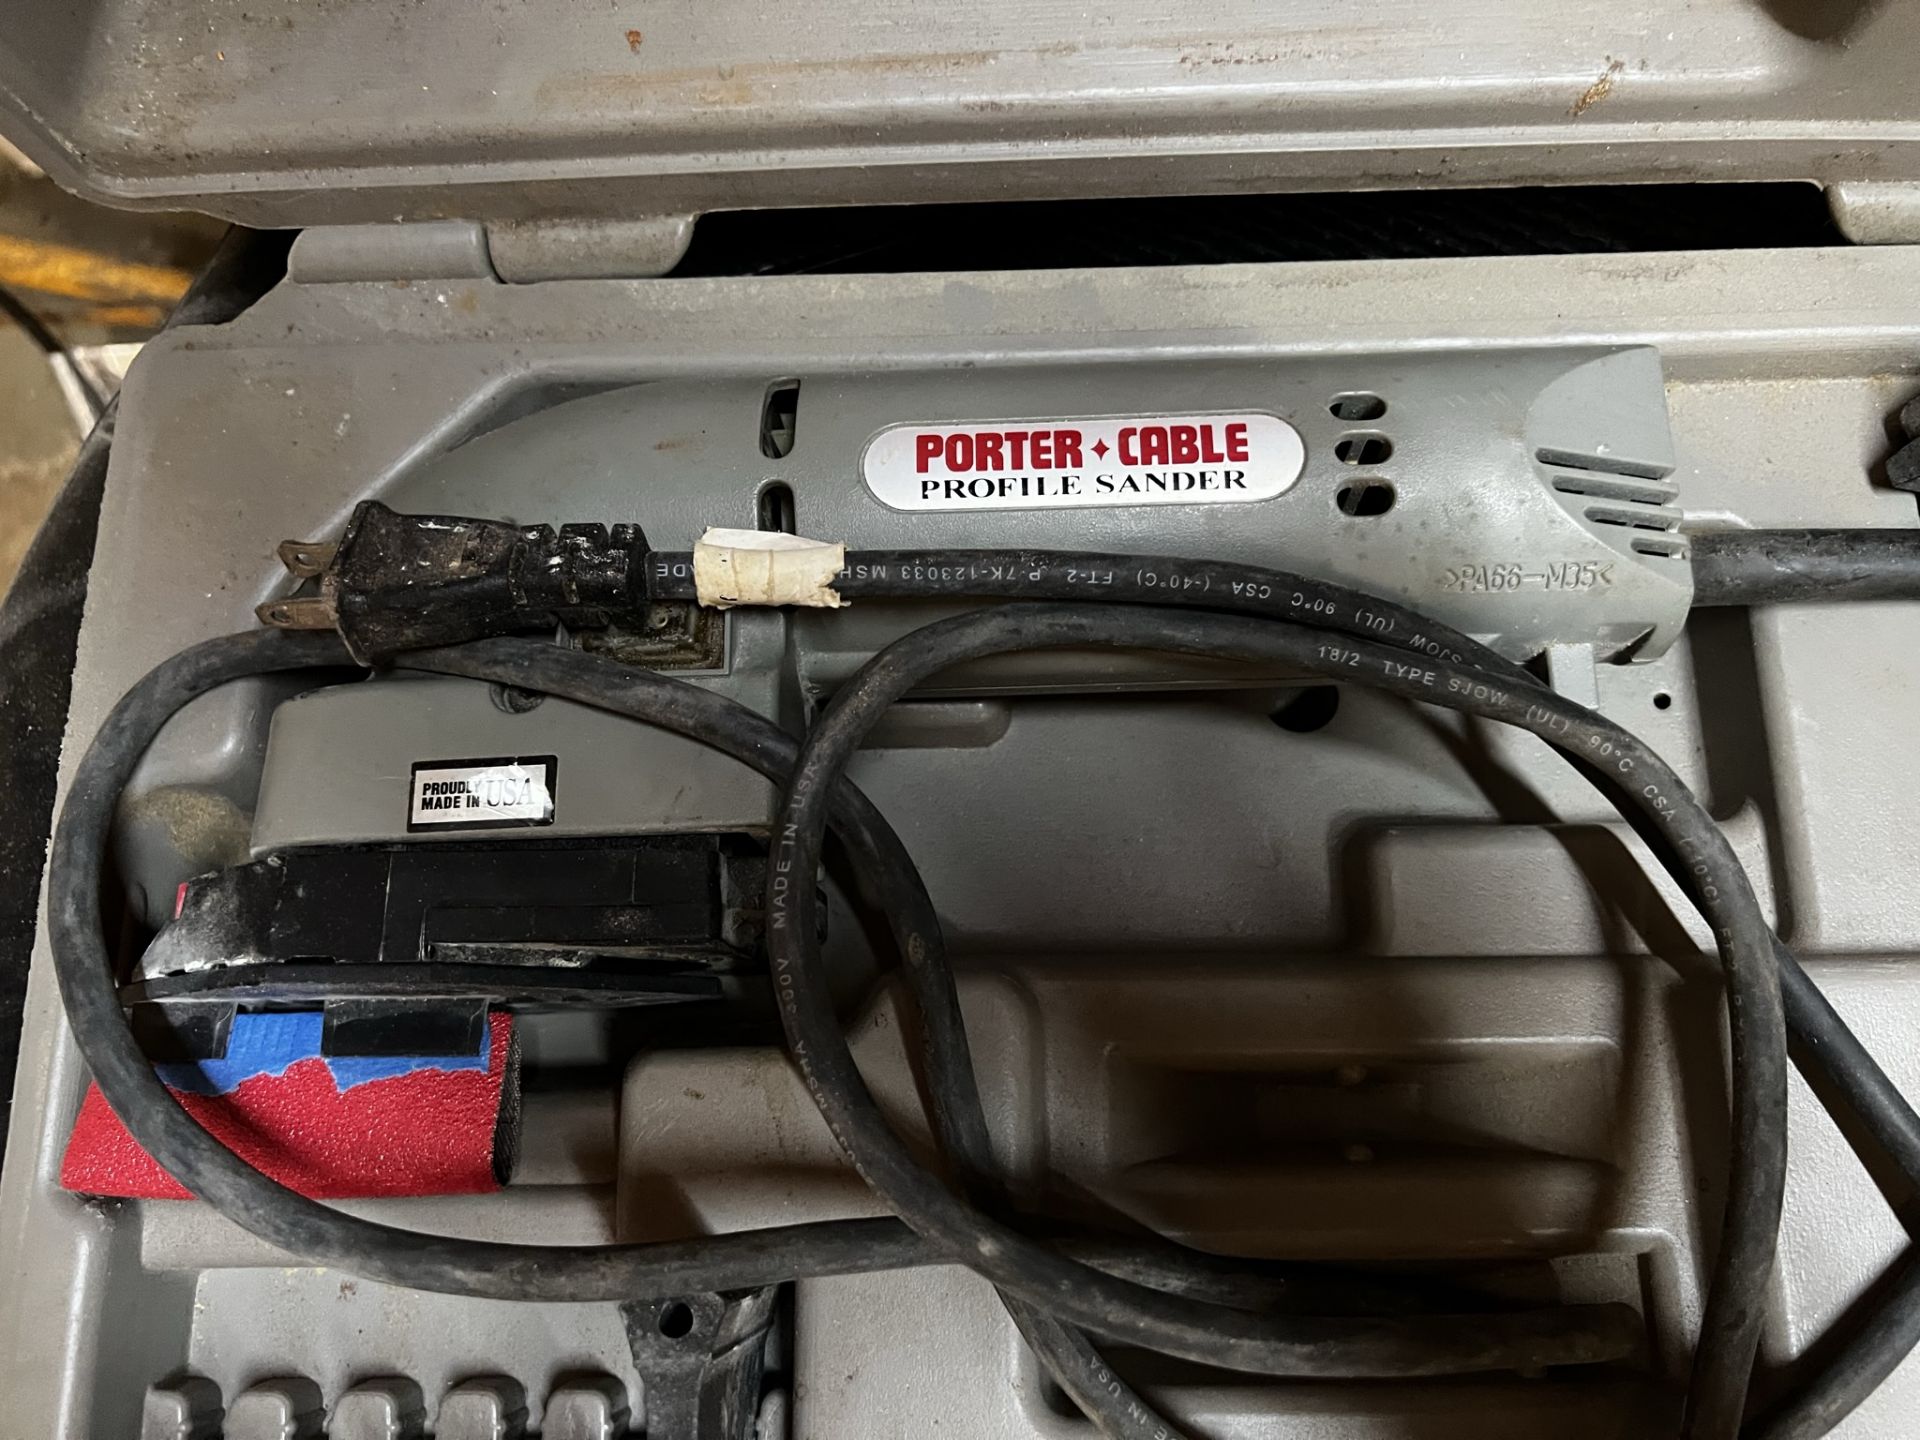 PORTER CABLE PROFILE SANDER IN CASE (LOCATED IN WEST PALM BEACH, FL) - Image 2 of 3